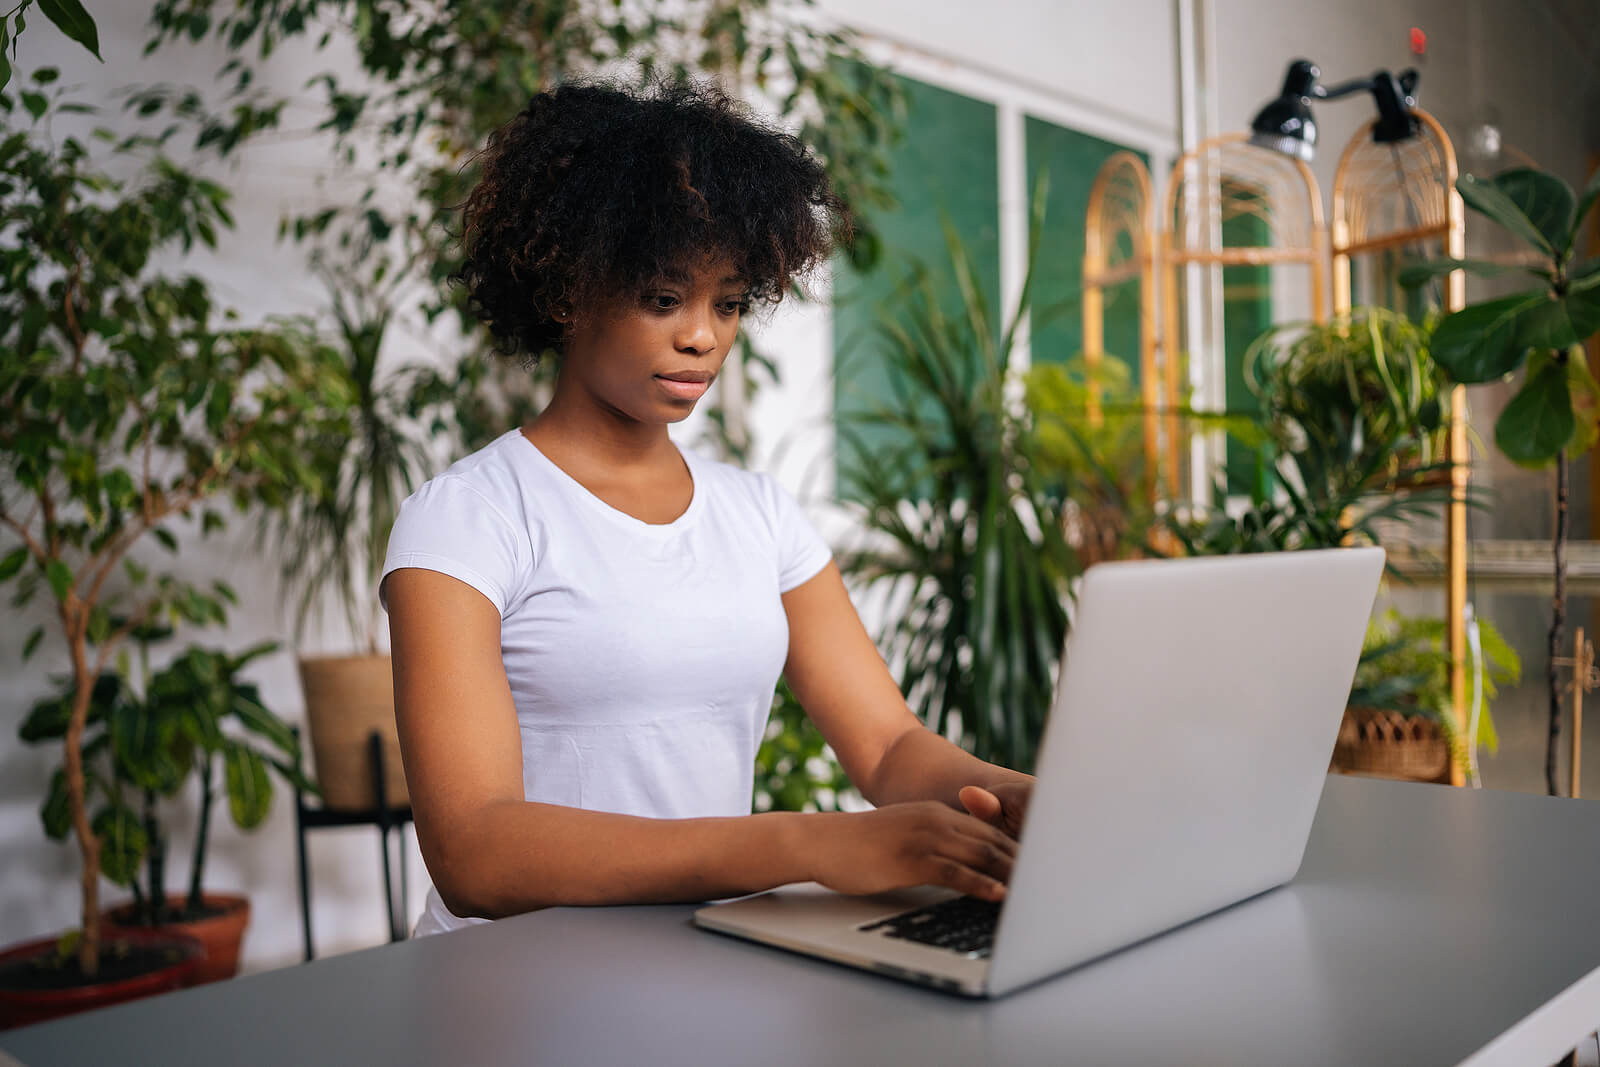 A Black woman wearing a white t-shirt, typing on her laptop at a desk surrounded by plants.